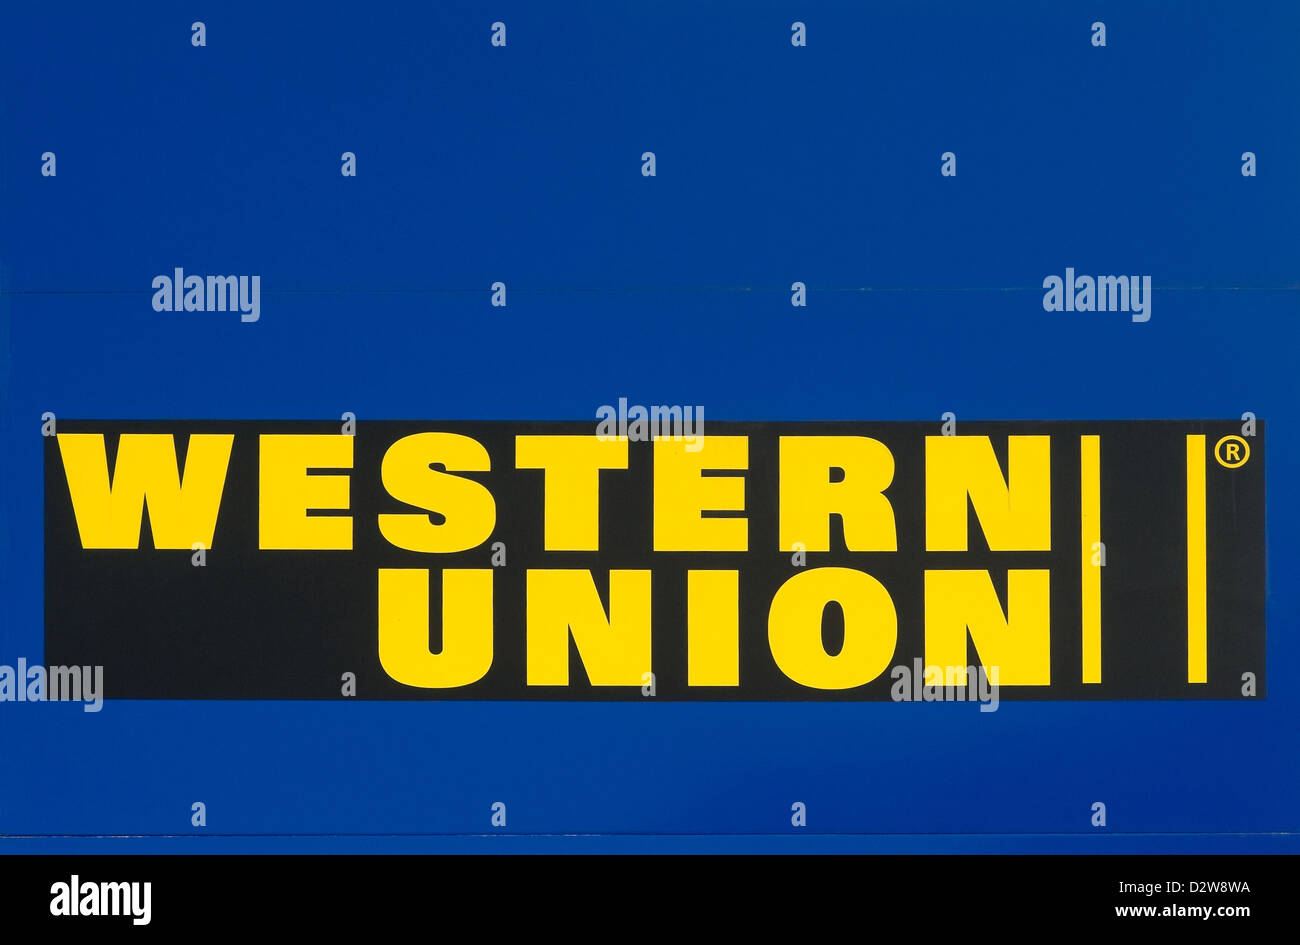 Western Union Logo High Resolution Stock Photography and Images - Alamy